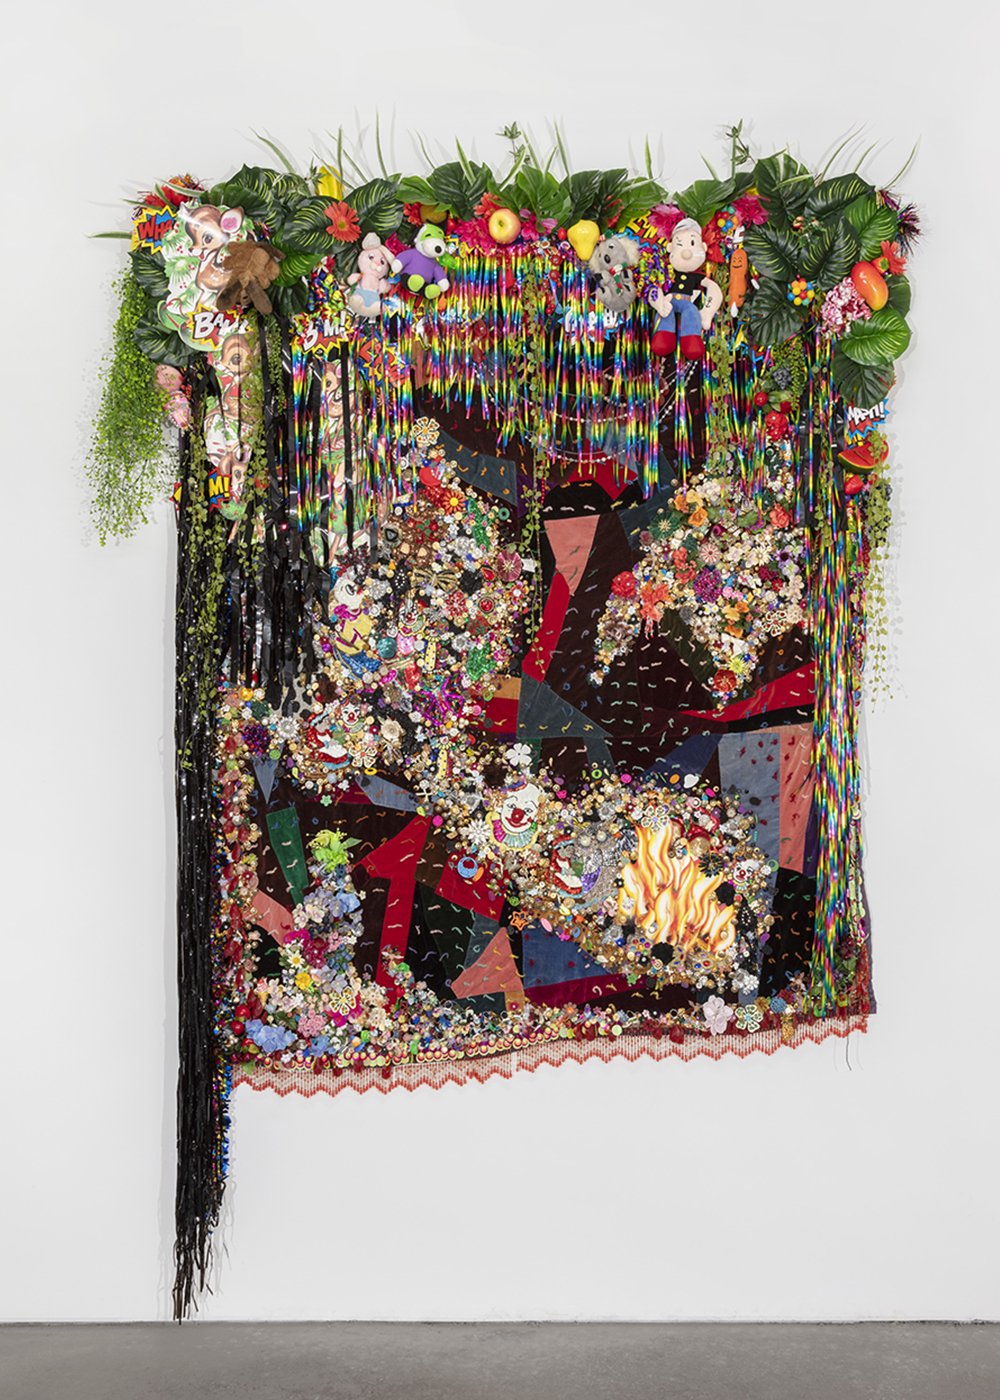   Shroud #1,  2021, Found ‘Crazy’ quilt ca. 1910, trim, fabric flowers, streamers, banners, garland, paper cut-outs, toys, ribbon, costume jewelry, buttons, plastic flowers, fauna, and fruit, beads, sequins, thread, fabric, Douglas fir, 114 x 78 x 12